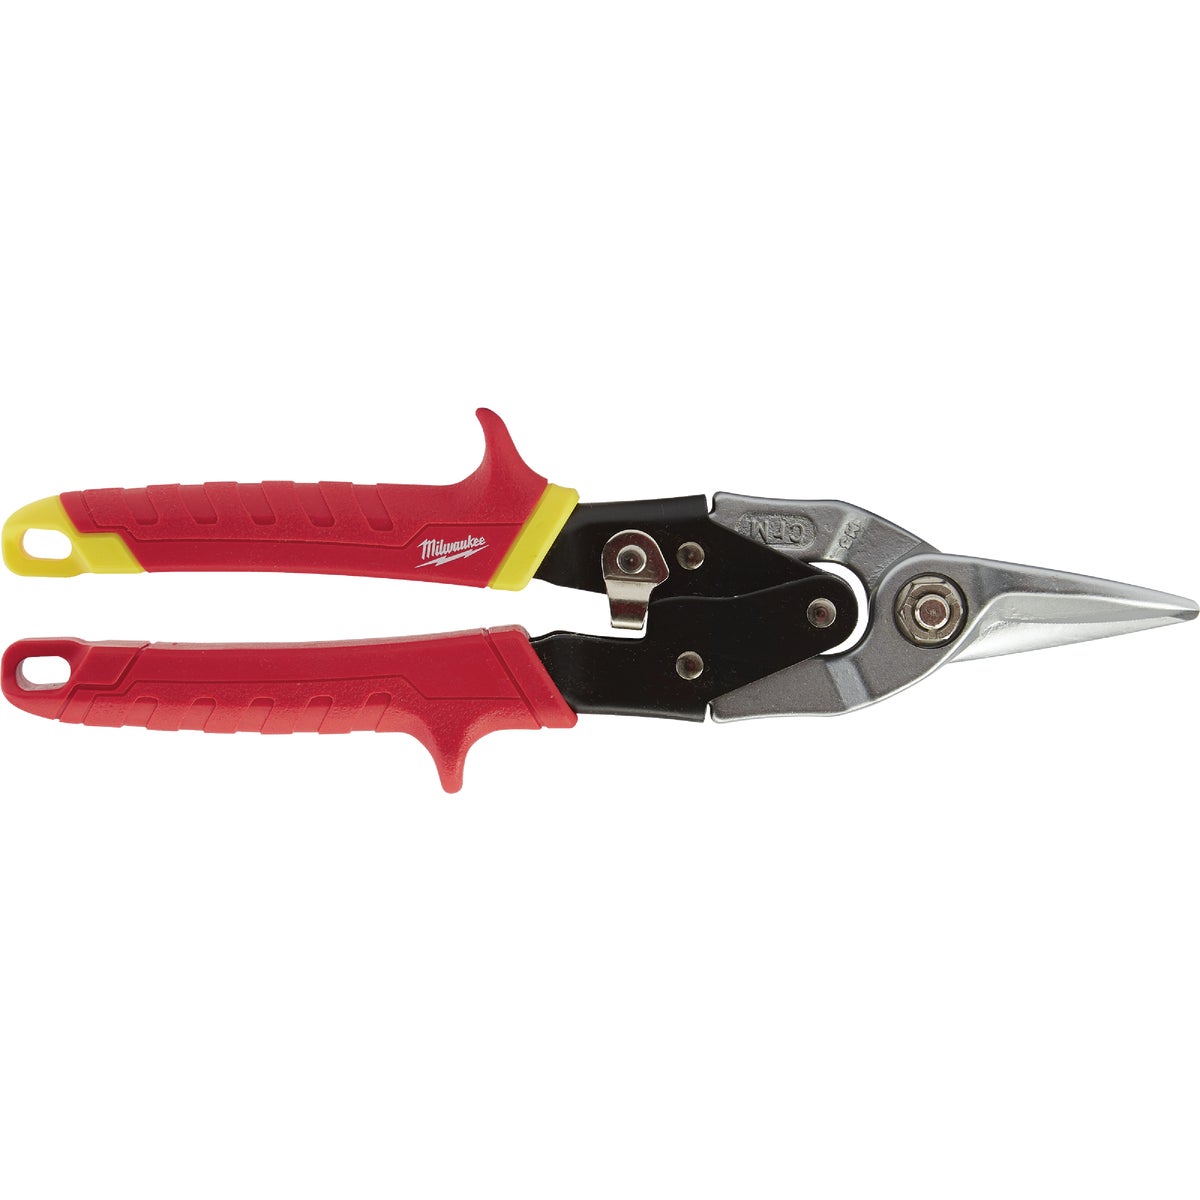 Item 302723, Snips feature forged alloy steel cutting heads for maximum strength and 